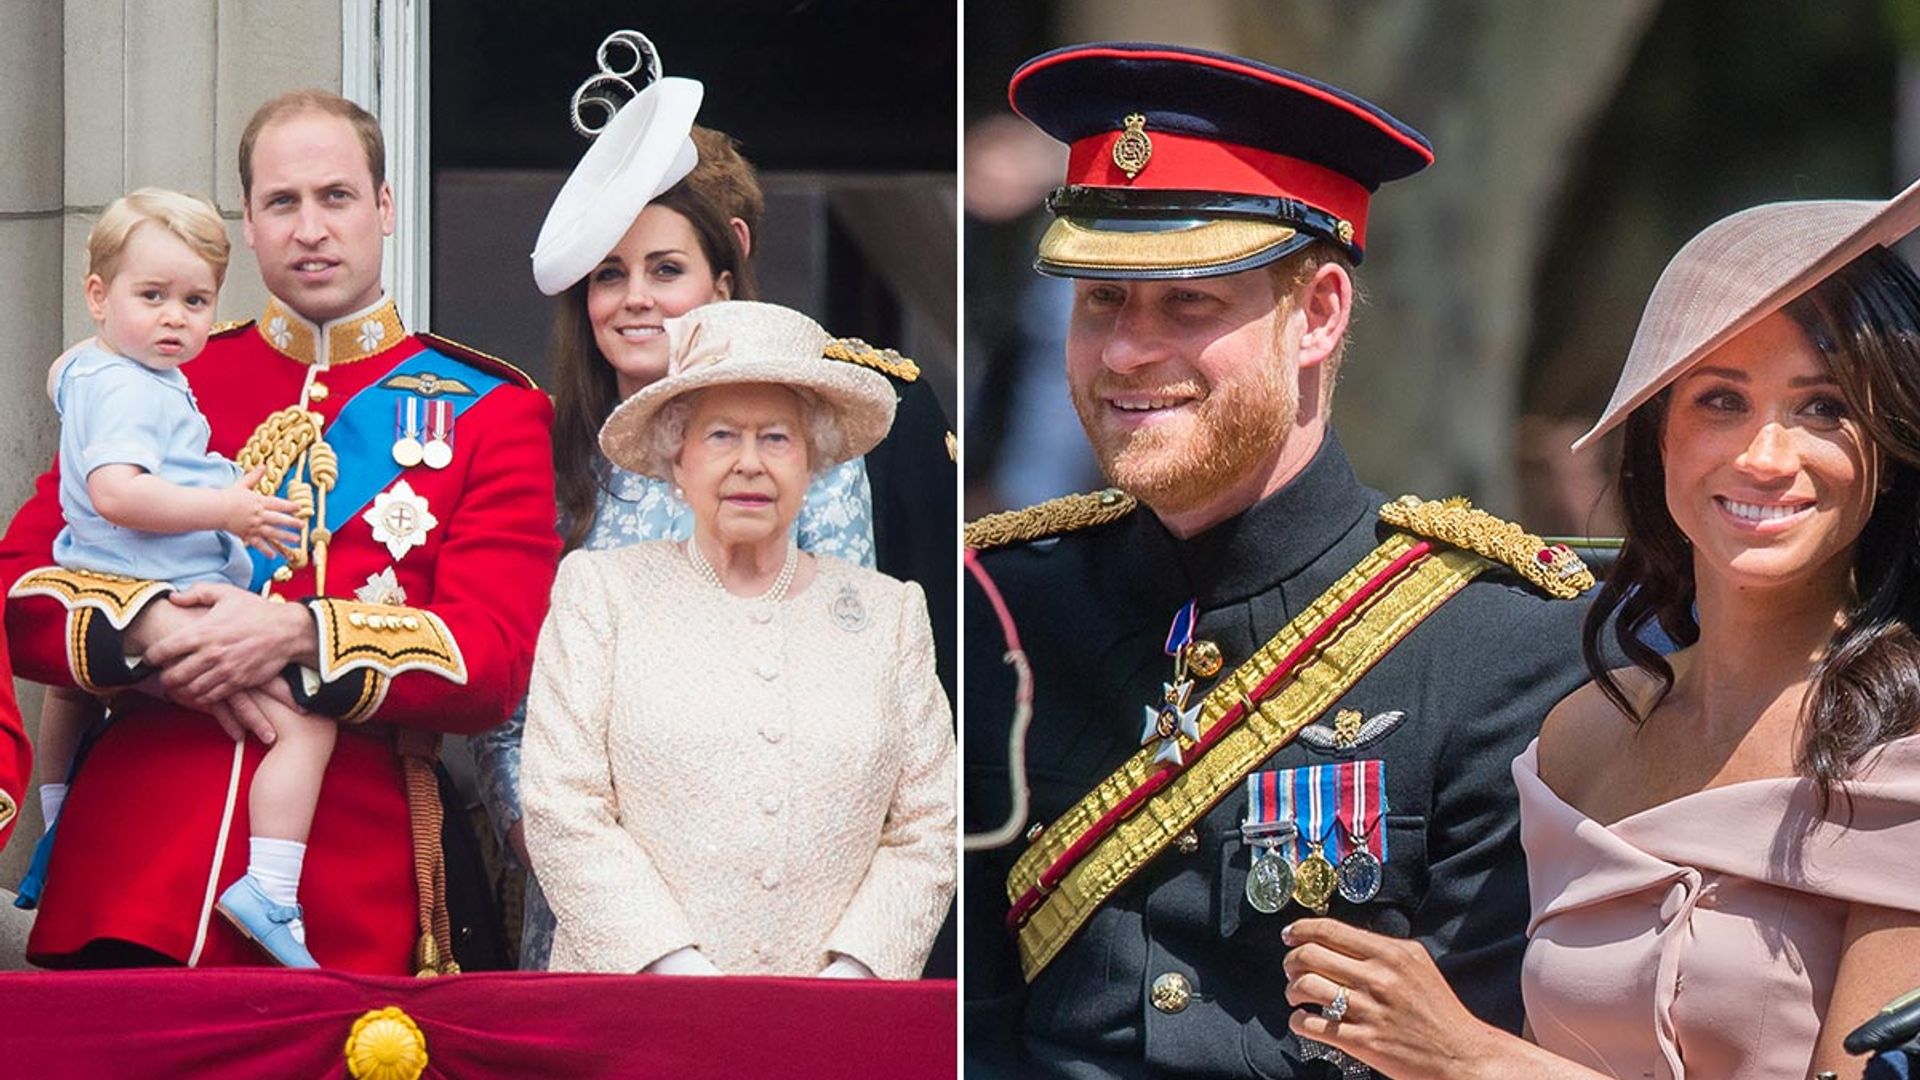 When royals make their debuts at the Queen's birthday parade